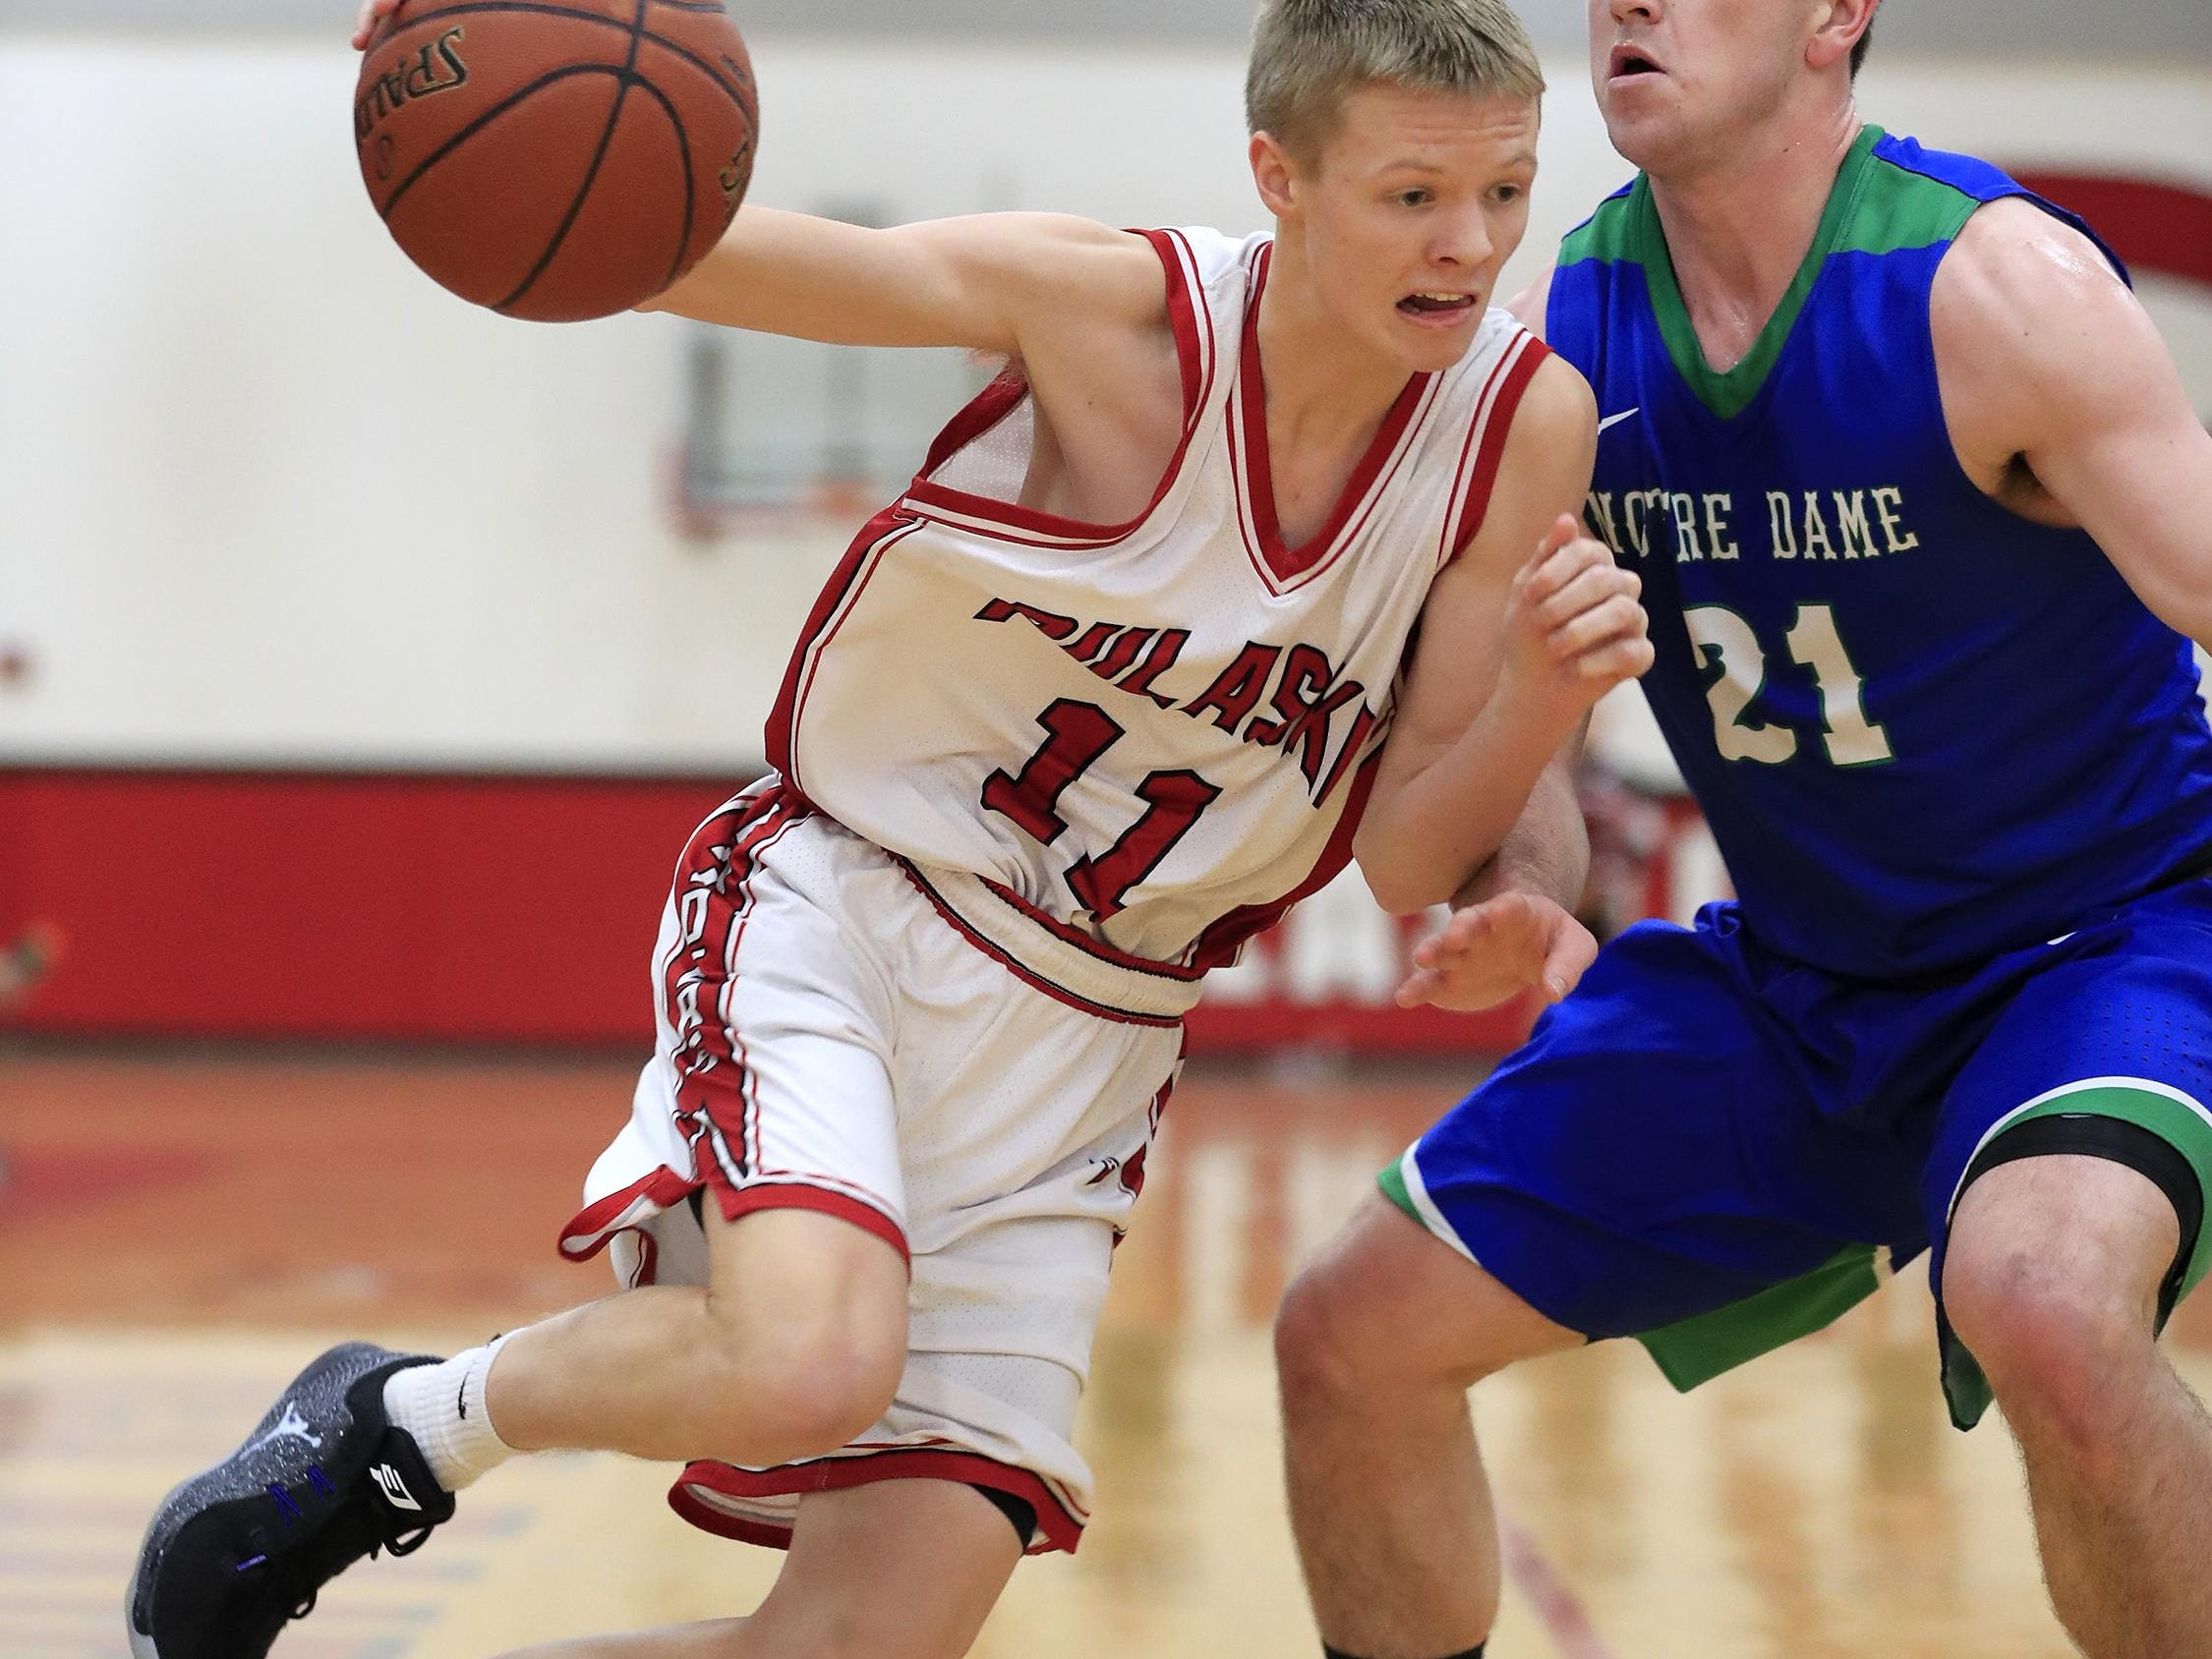 Pulaski’s Griffin Robaidek (11) attempts to dribble past Notre Dame’s Ryan O'Connell (21) on Tuesday at Pulaski.